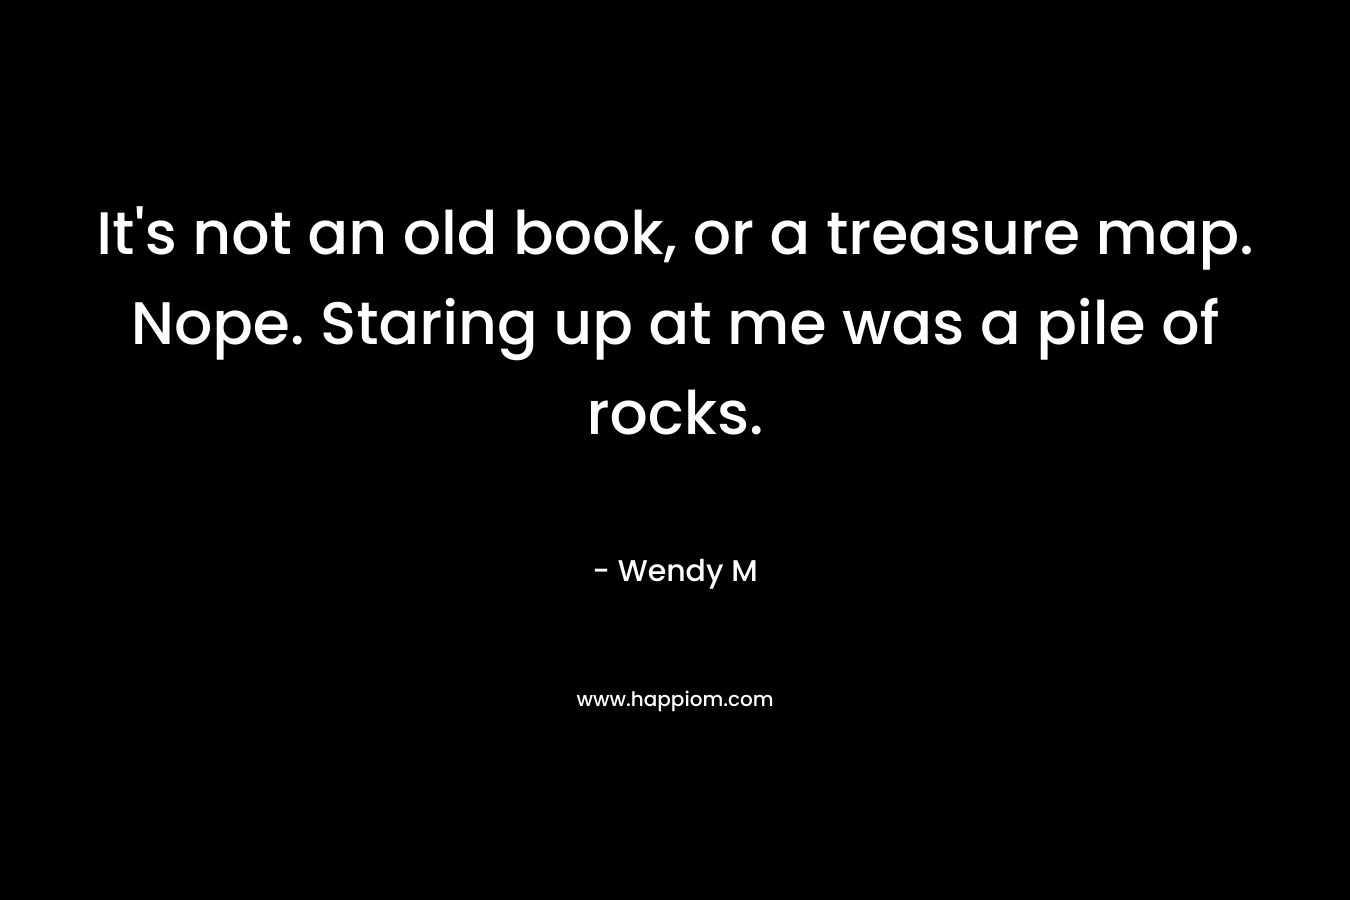 It’s not an old book, or a treasure map. Nope. Staring up at me was a pile of rocks. – Wendy M